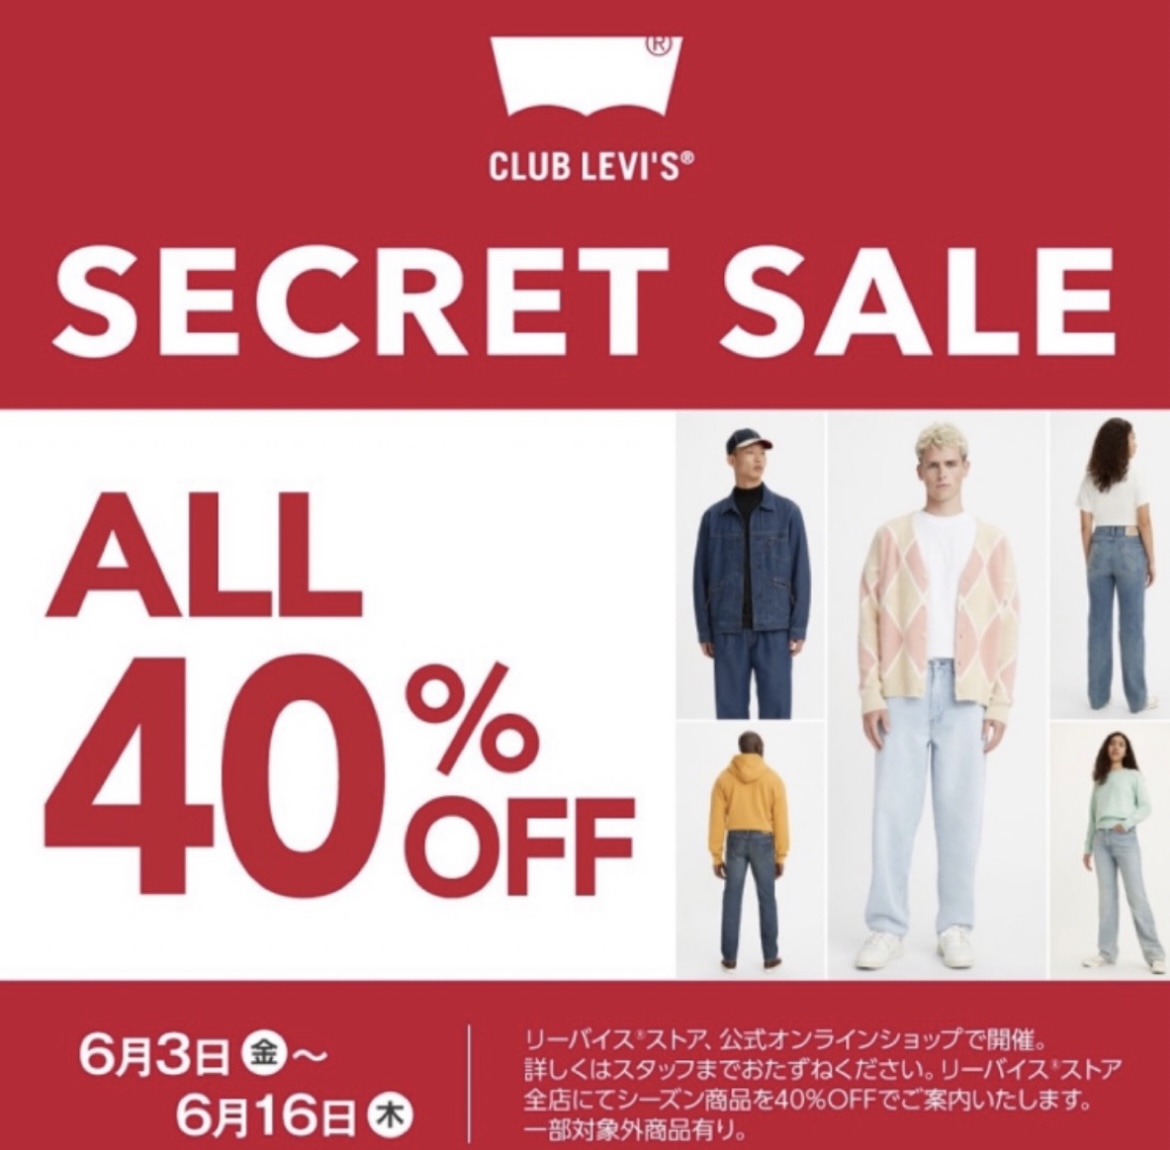 LEVI’S  シークレットセール/タイムセール開催 6月3日〜6月16日